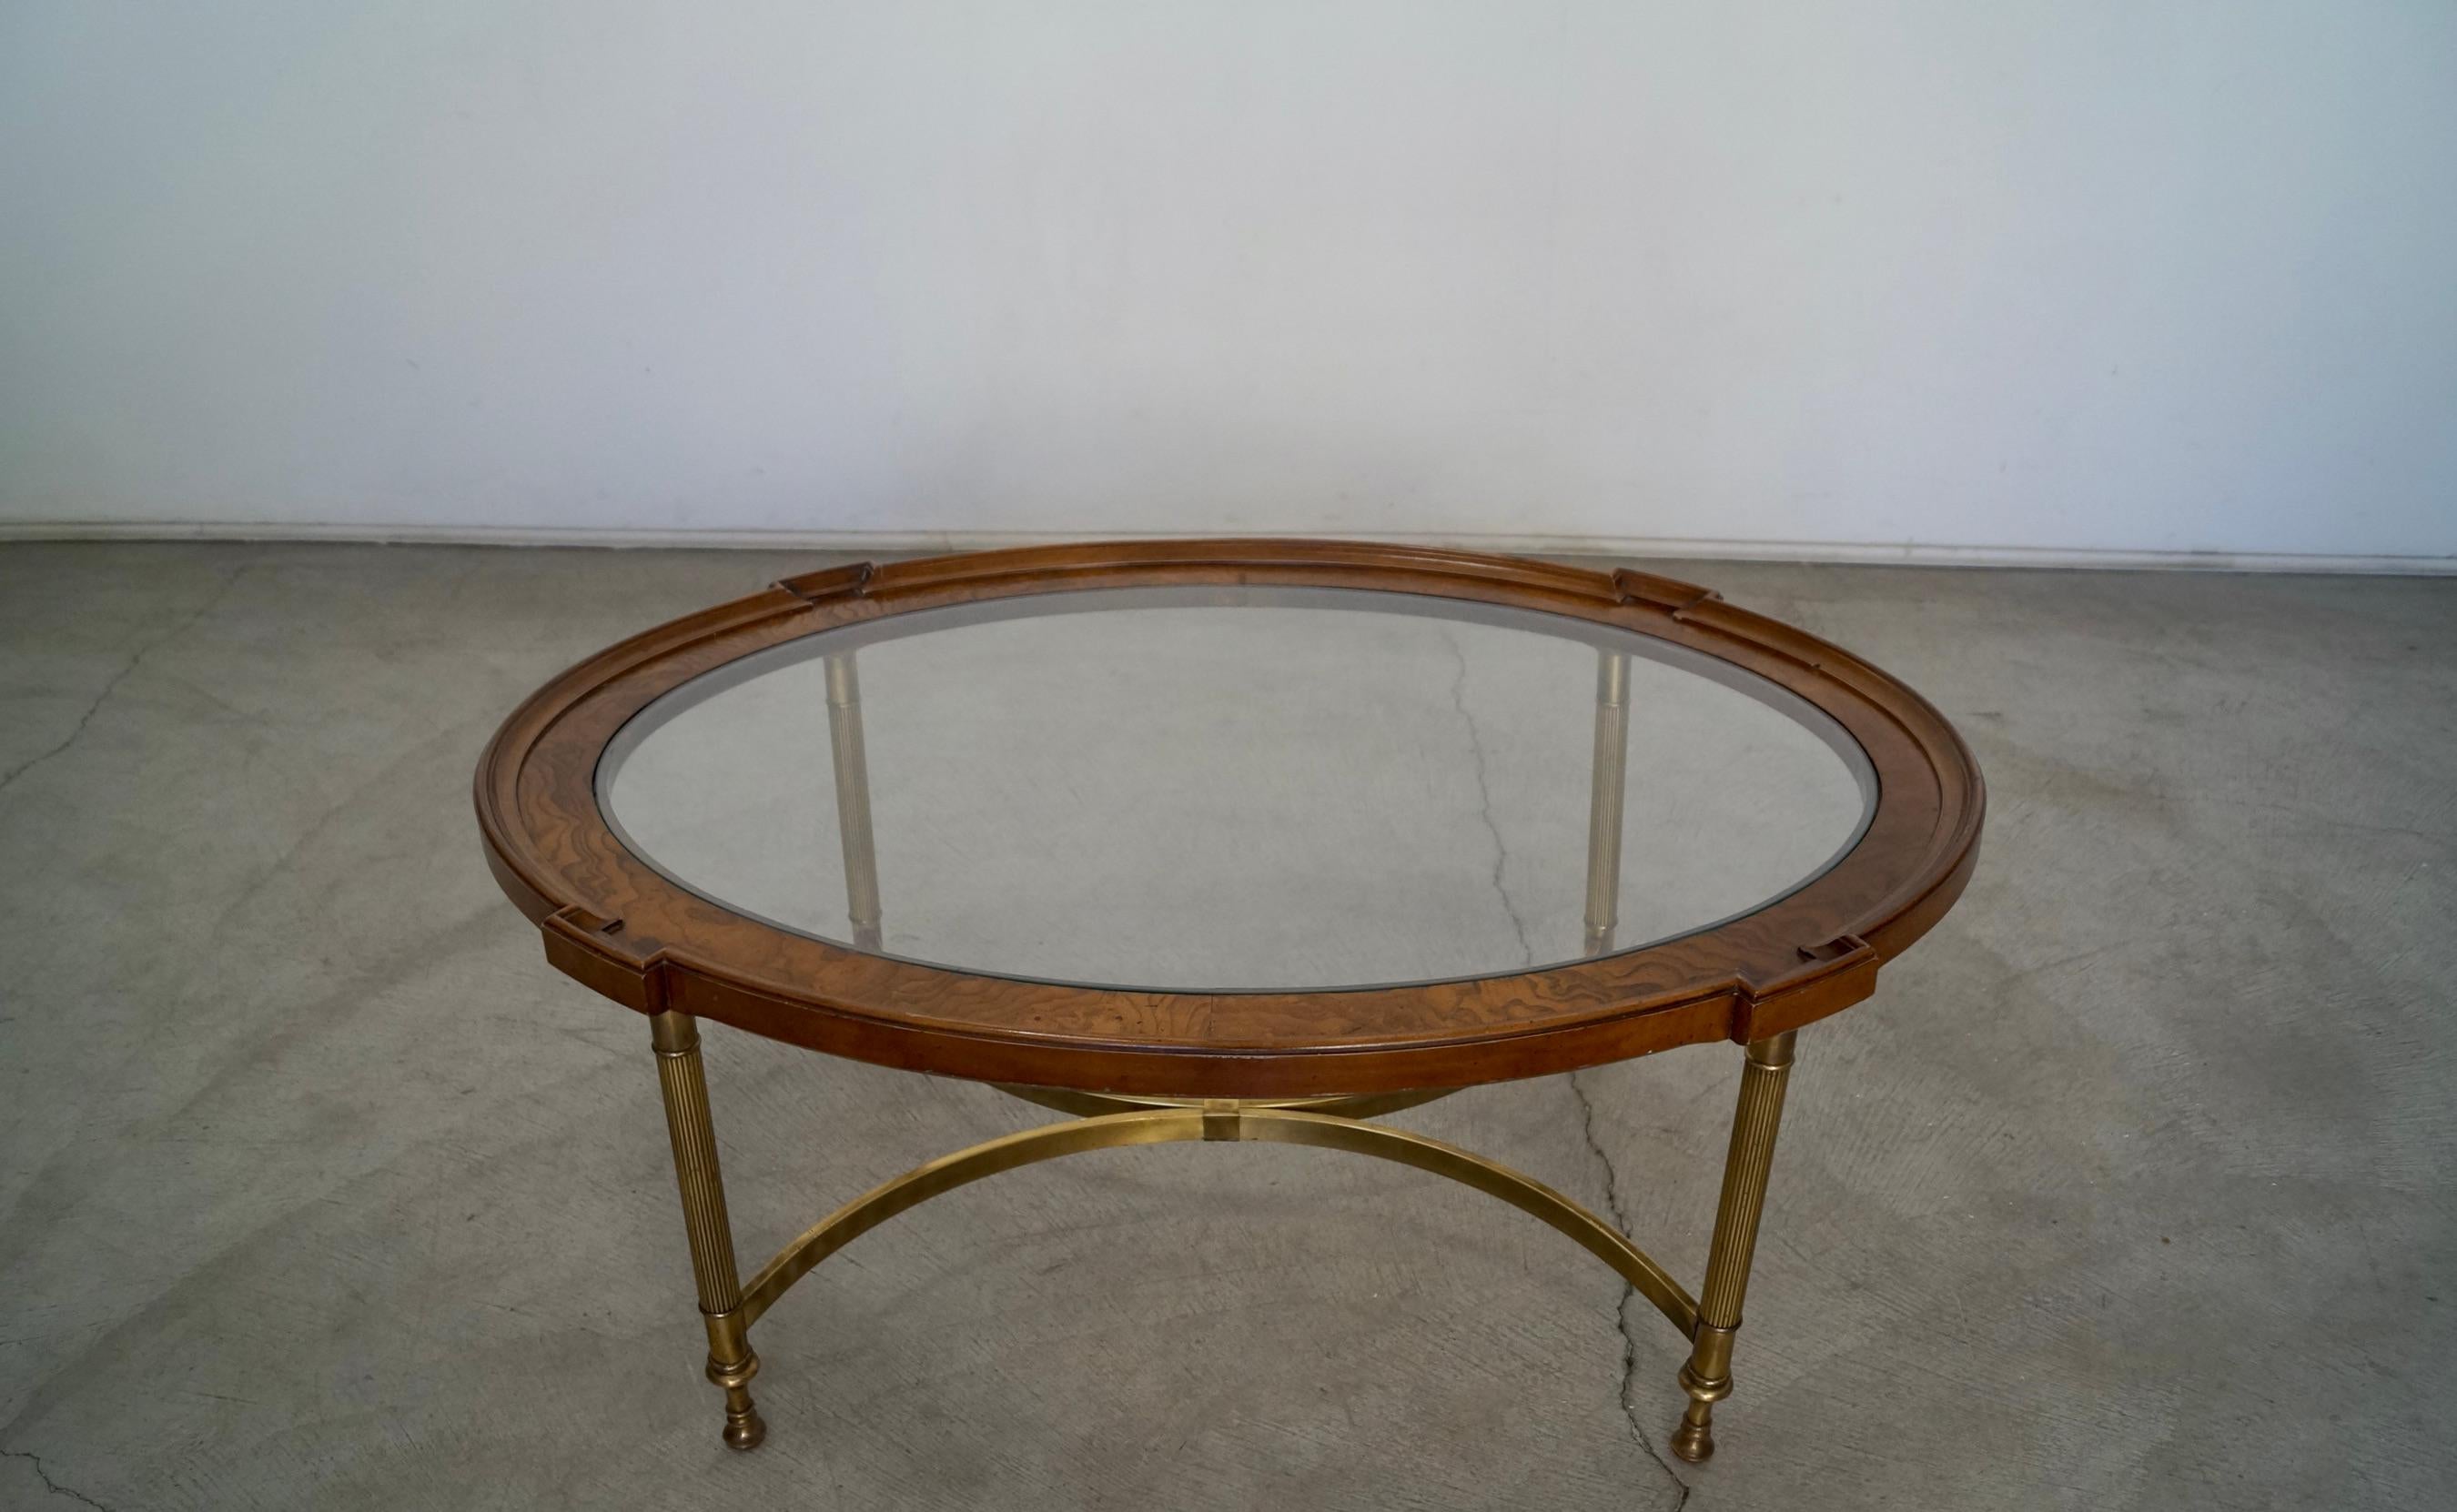 Vintage 1960's burl wood coffee table for sale. It was manufactured by Brandt Furniture, and is really well made. It has a solid brass base with brass stretchers, and a burl wood and glass top. It's in excellent condition, and is a beautiful table